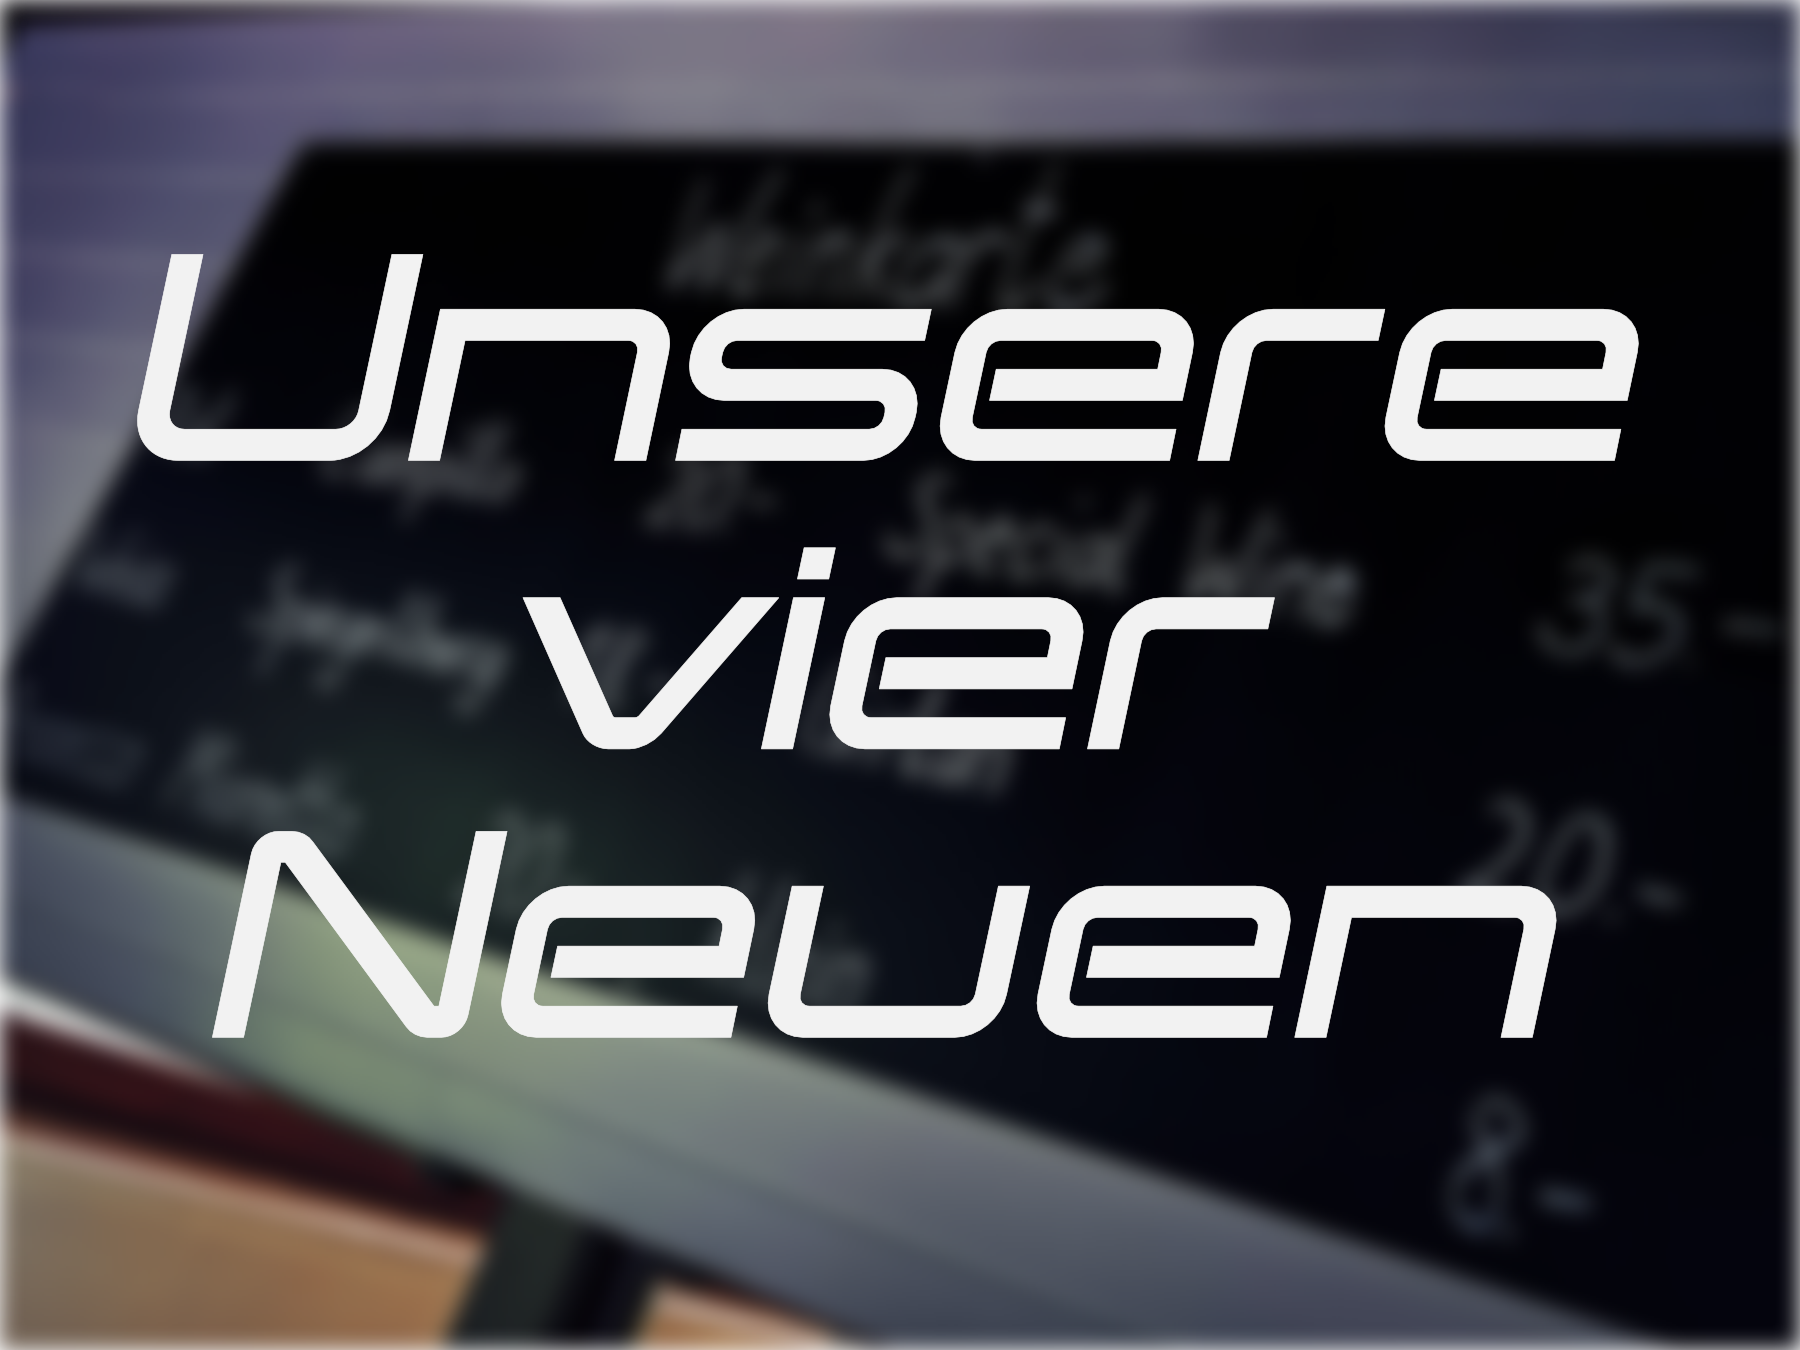 Read more about the article Unsere vier Neuen…